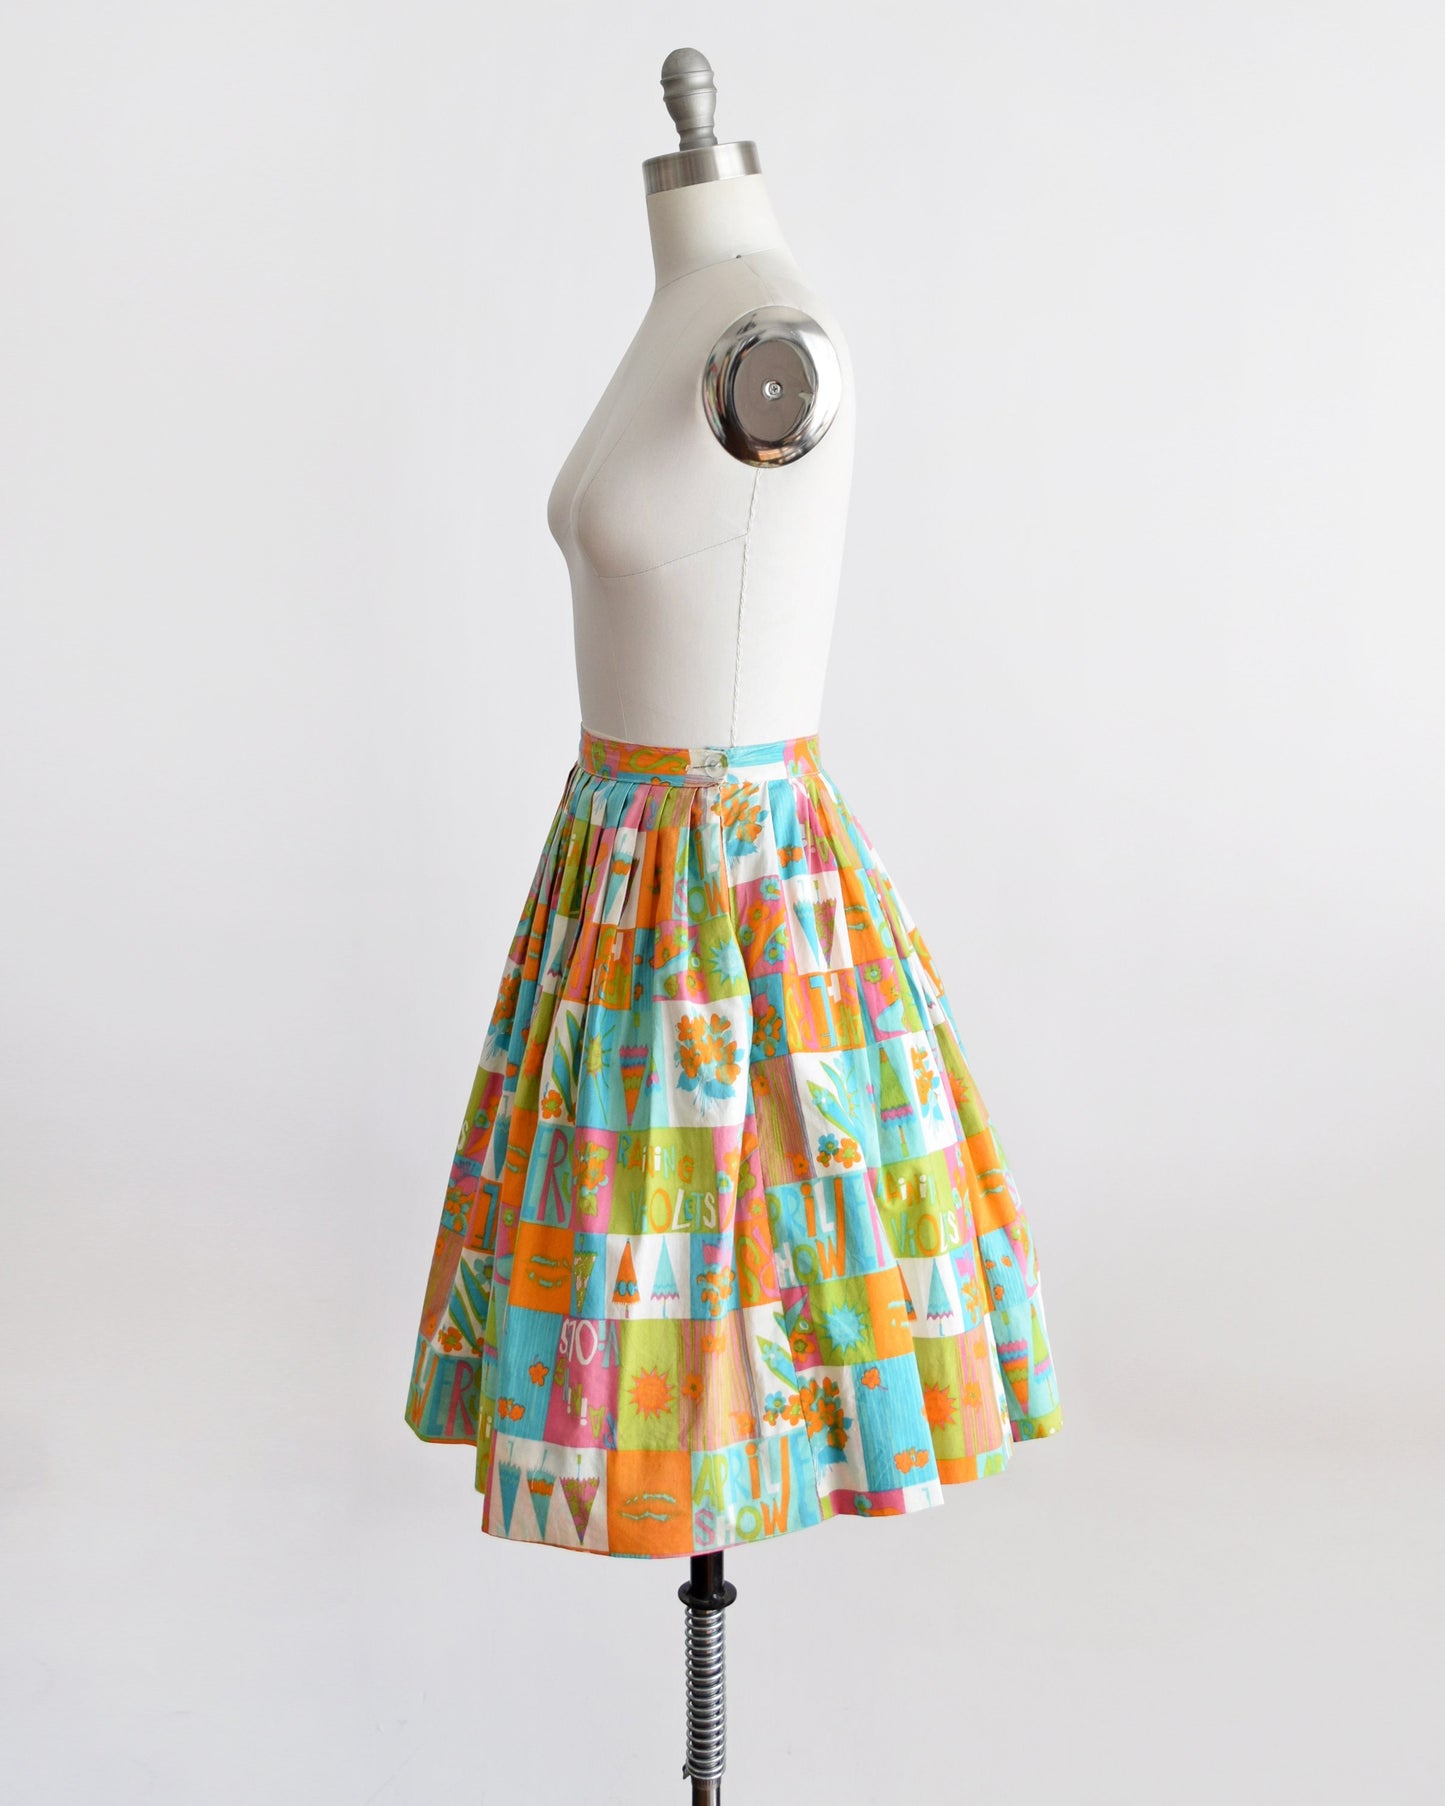 Side view of a vintage 50s skirt has an April showers theme with colorful blocks of flowers, umbrellas, shoes, the sun, and the words April Showers and Raining Violets in a classic mid century print. Skirt is modeled on a dress form